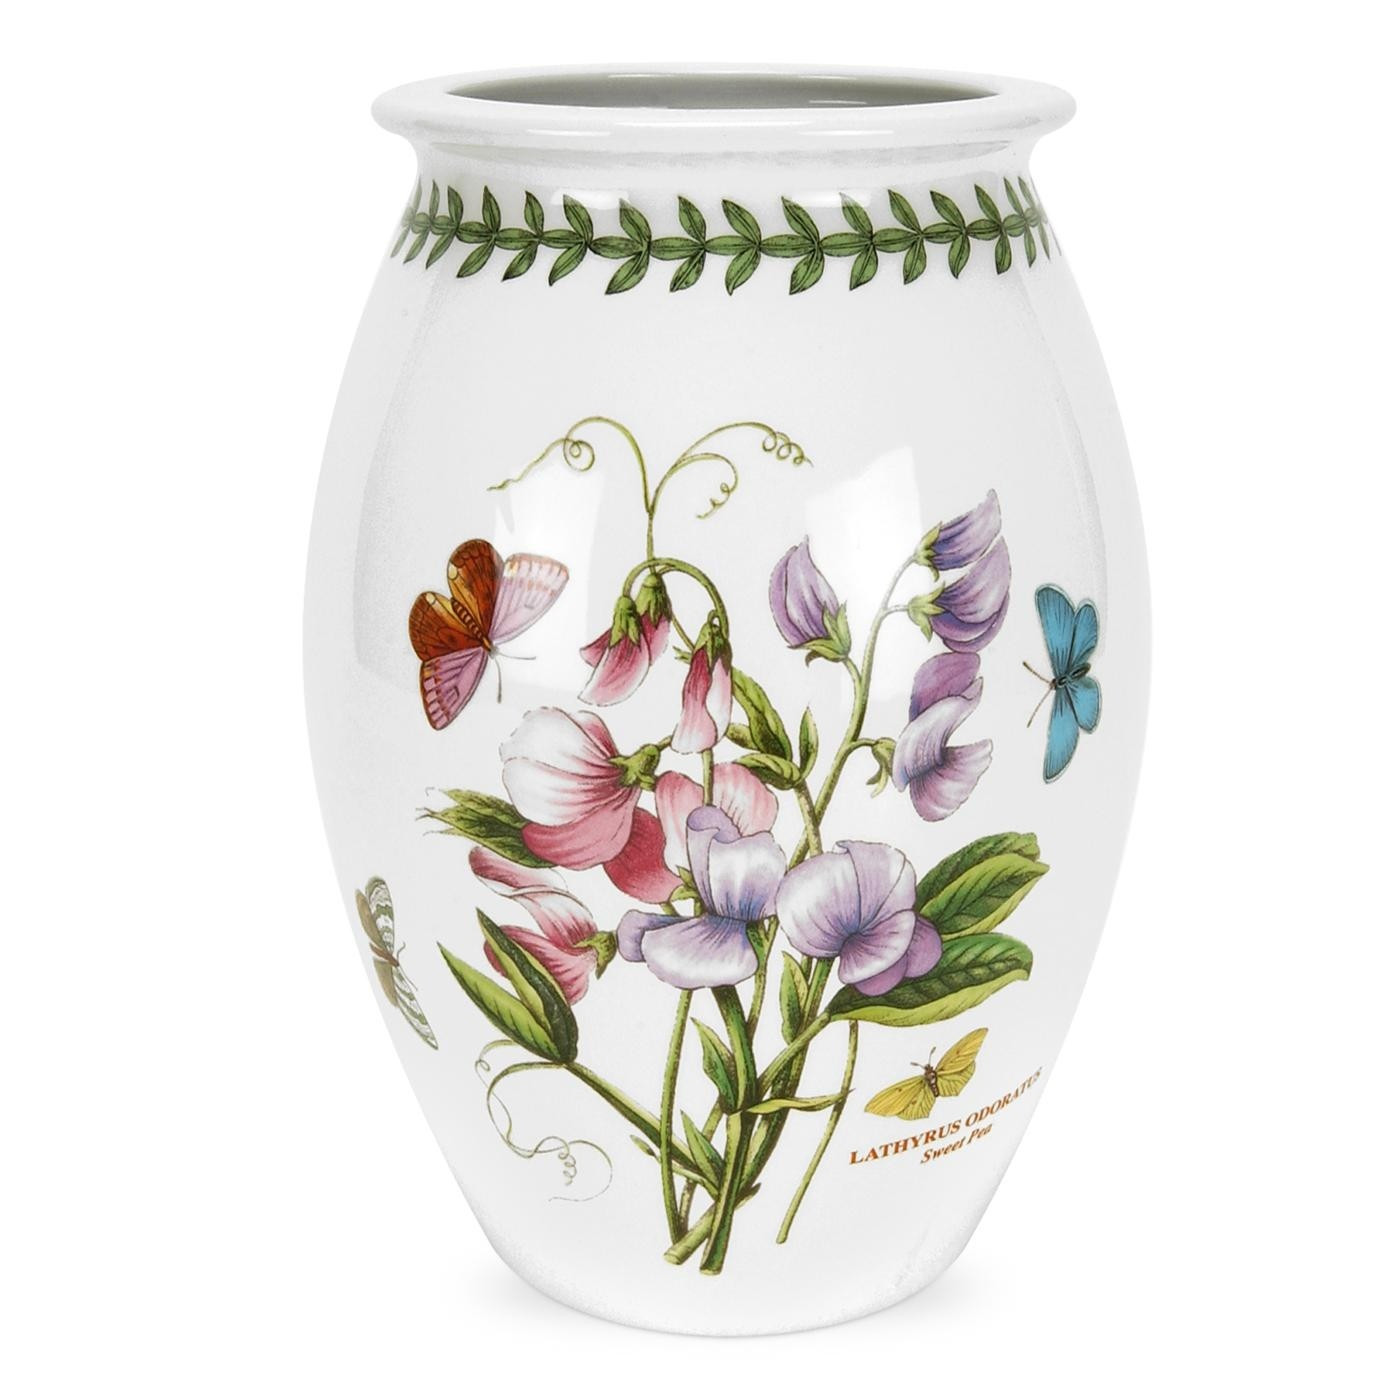 16 Stylish Red and Gold Glass Vase 2024 free download red and gold glass vase of portmeirion botanic garden seconds 9 inch sovereign vase large no with portmeirion botanic garden seconds 9 inch sovereign vase large no guarantee of flower design